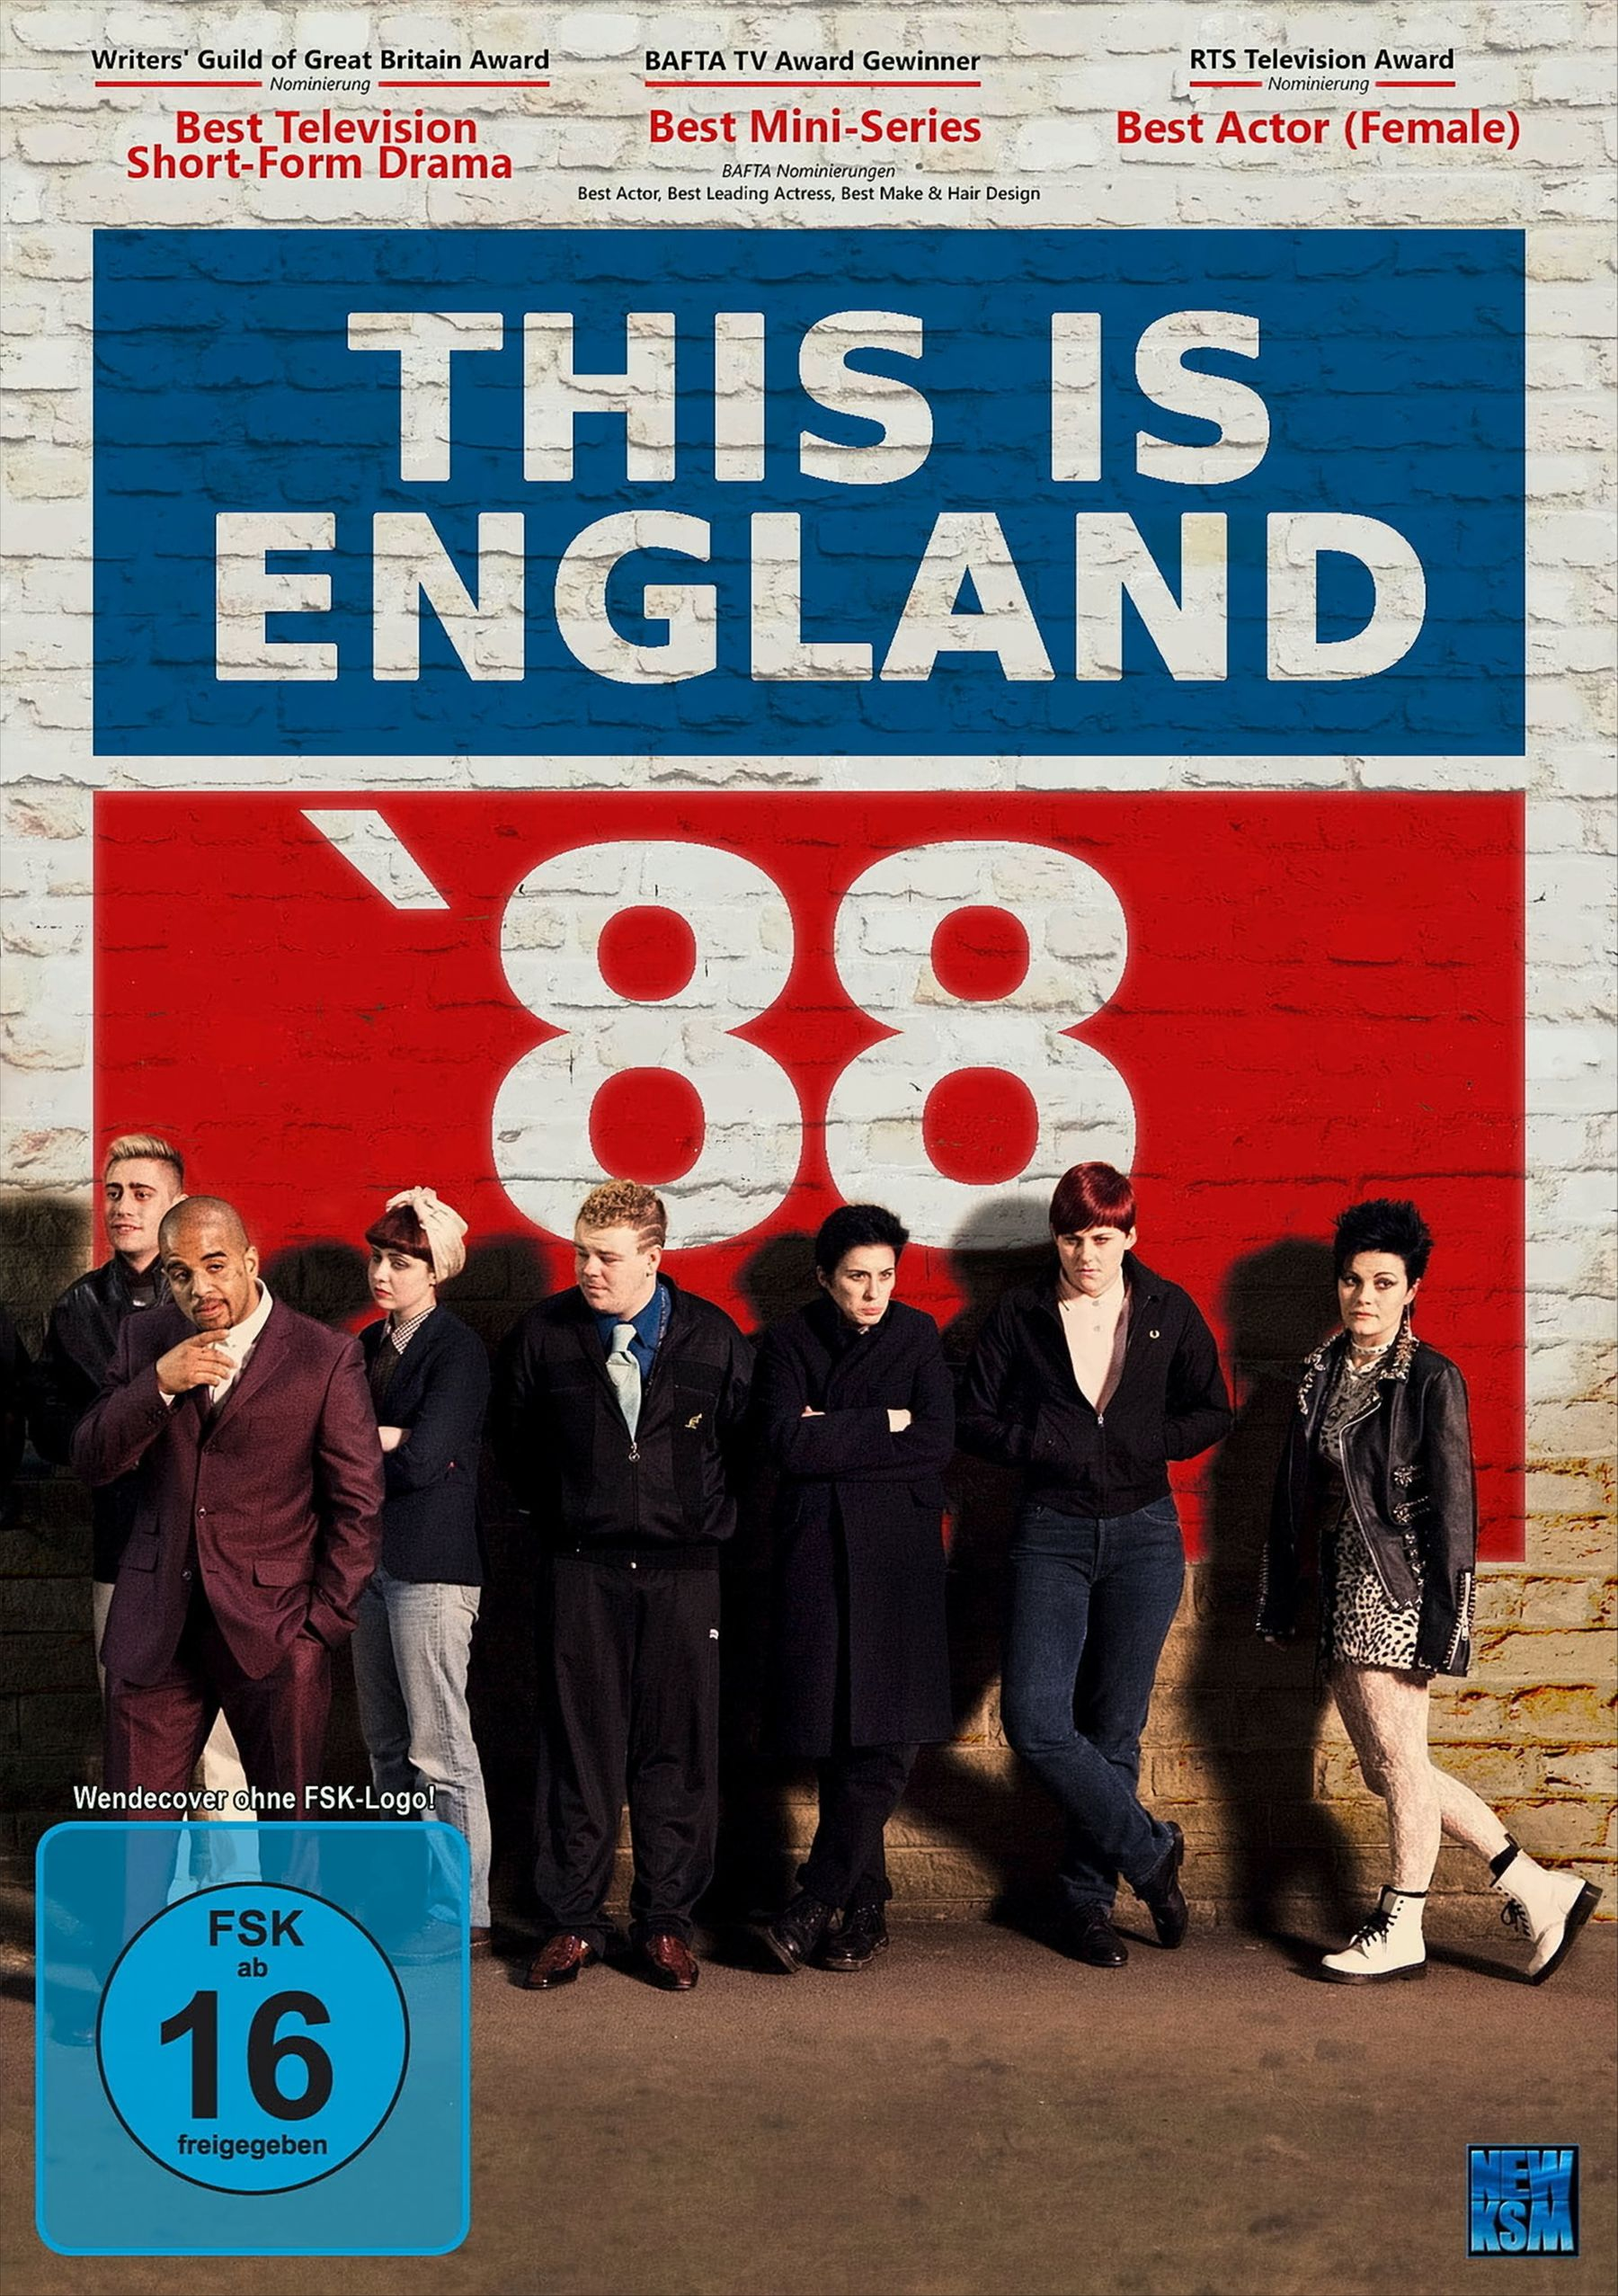 This Is DVD \'88 England